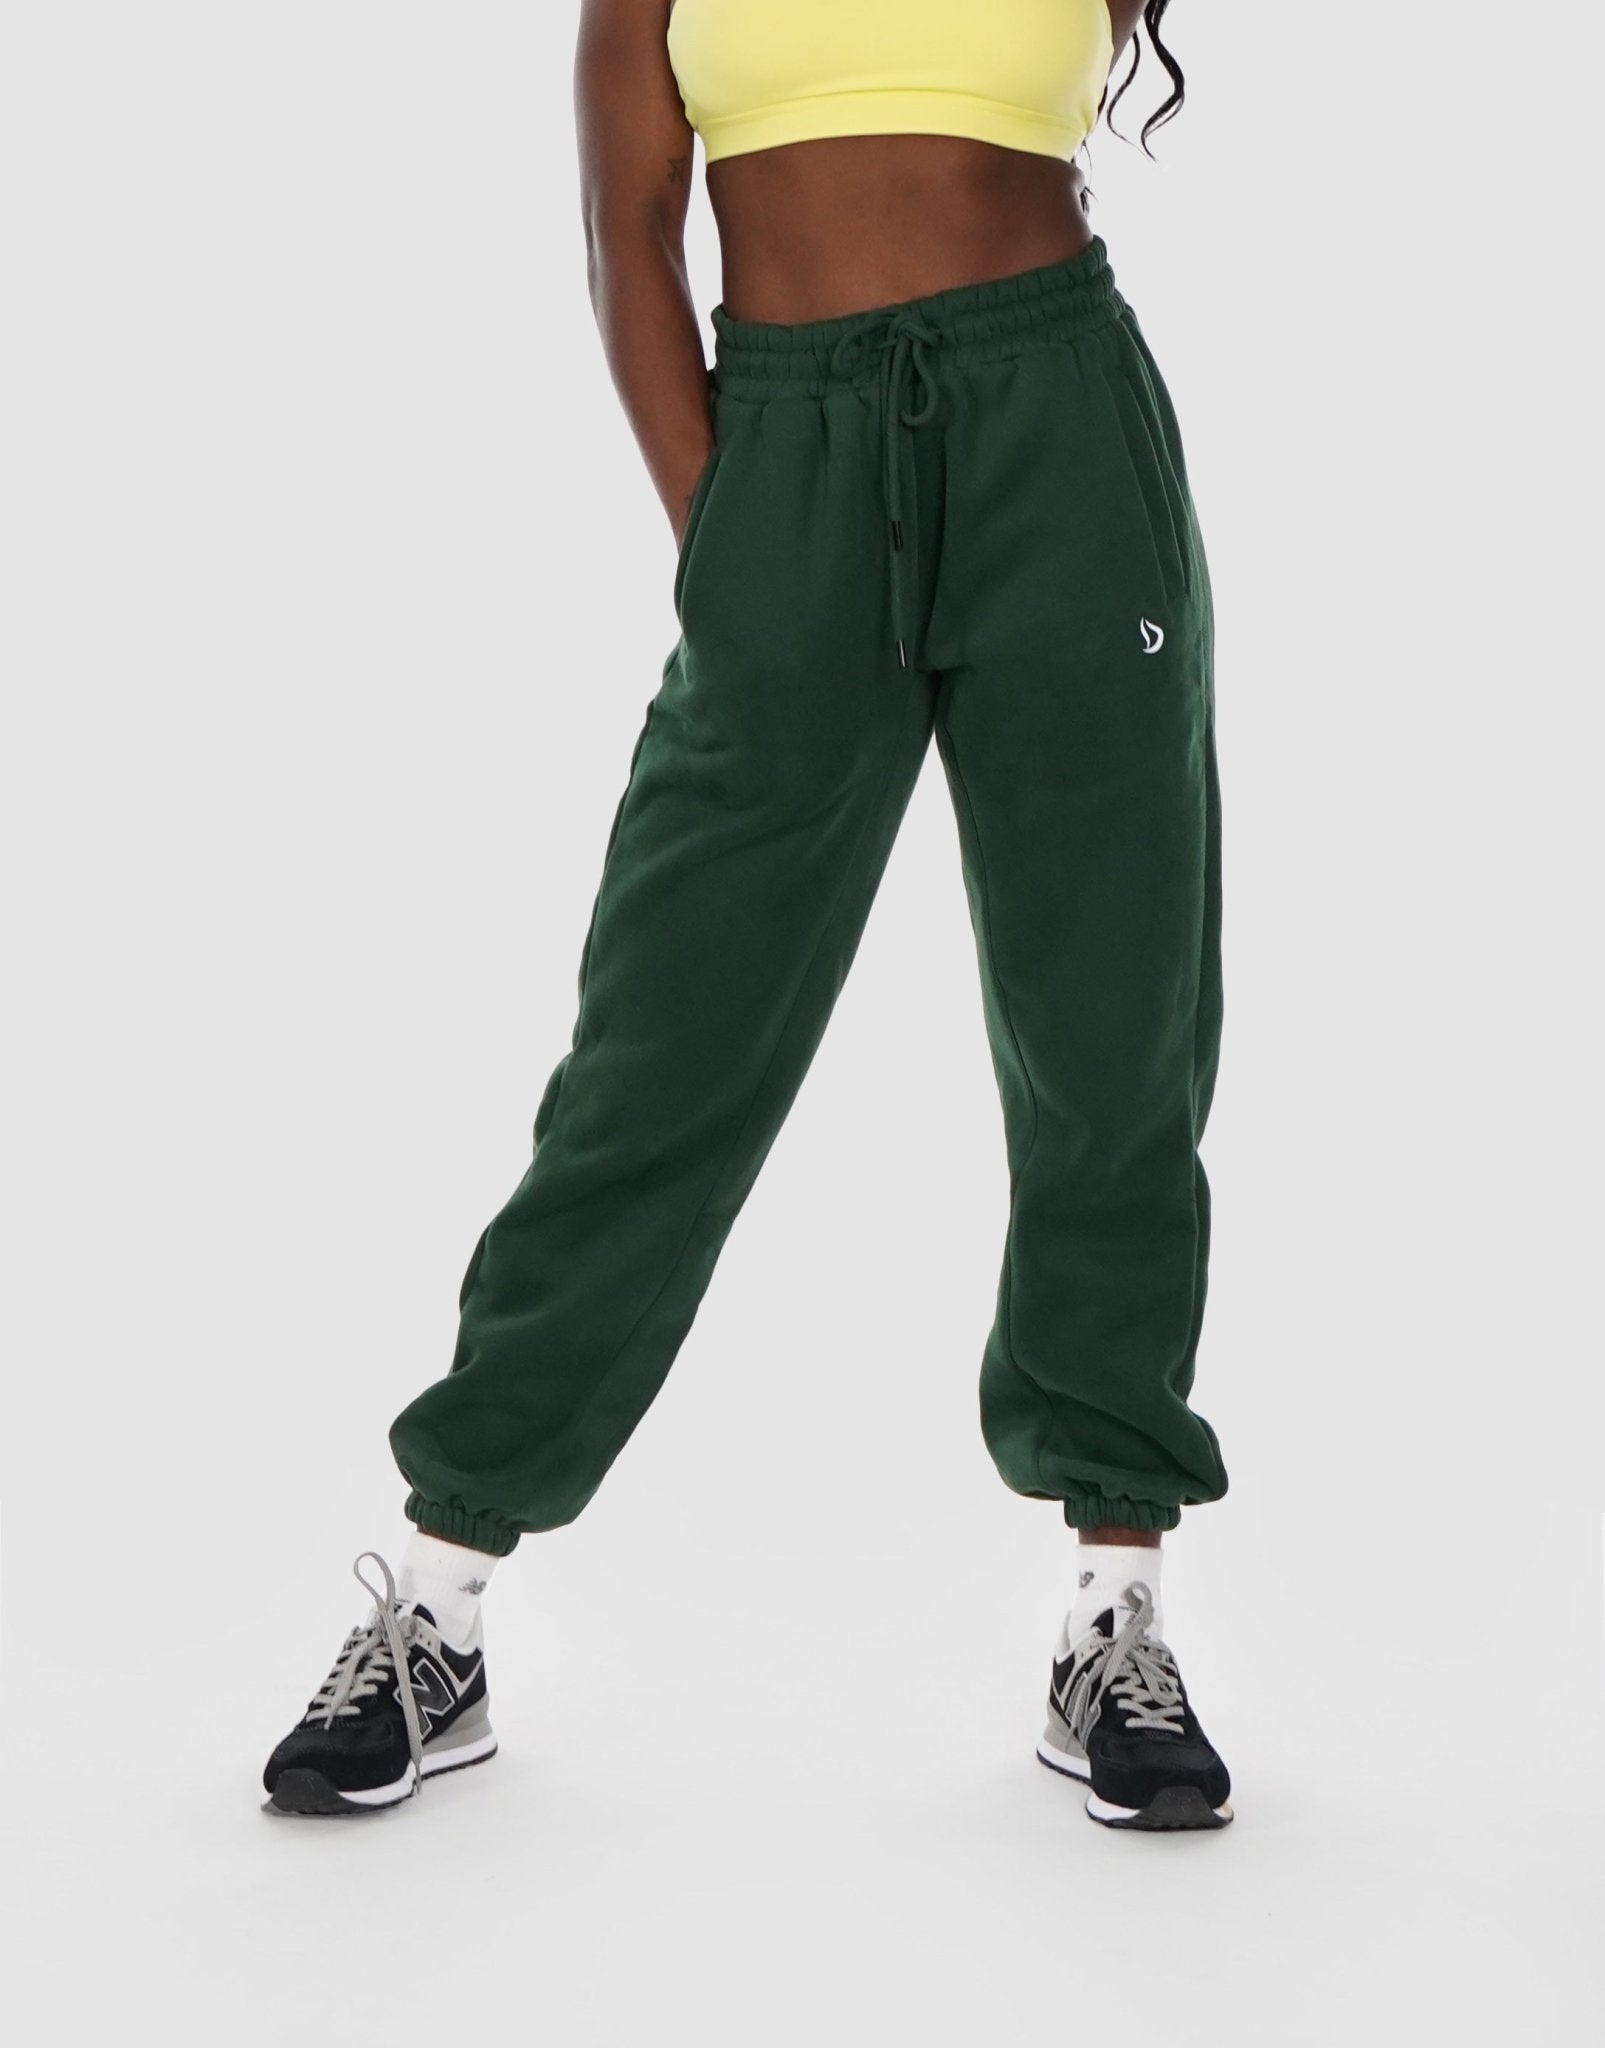 Kick Back Distressed Joggers in Olive  Cozy sweatpants, Joggers, Comfy  outfits